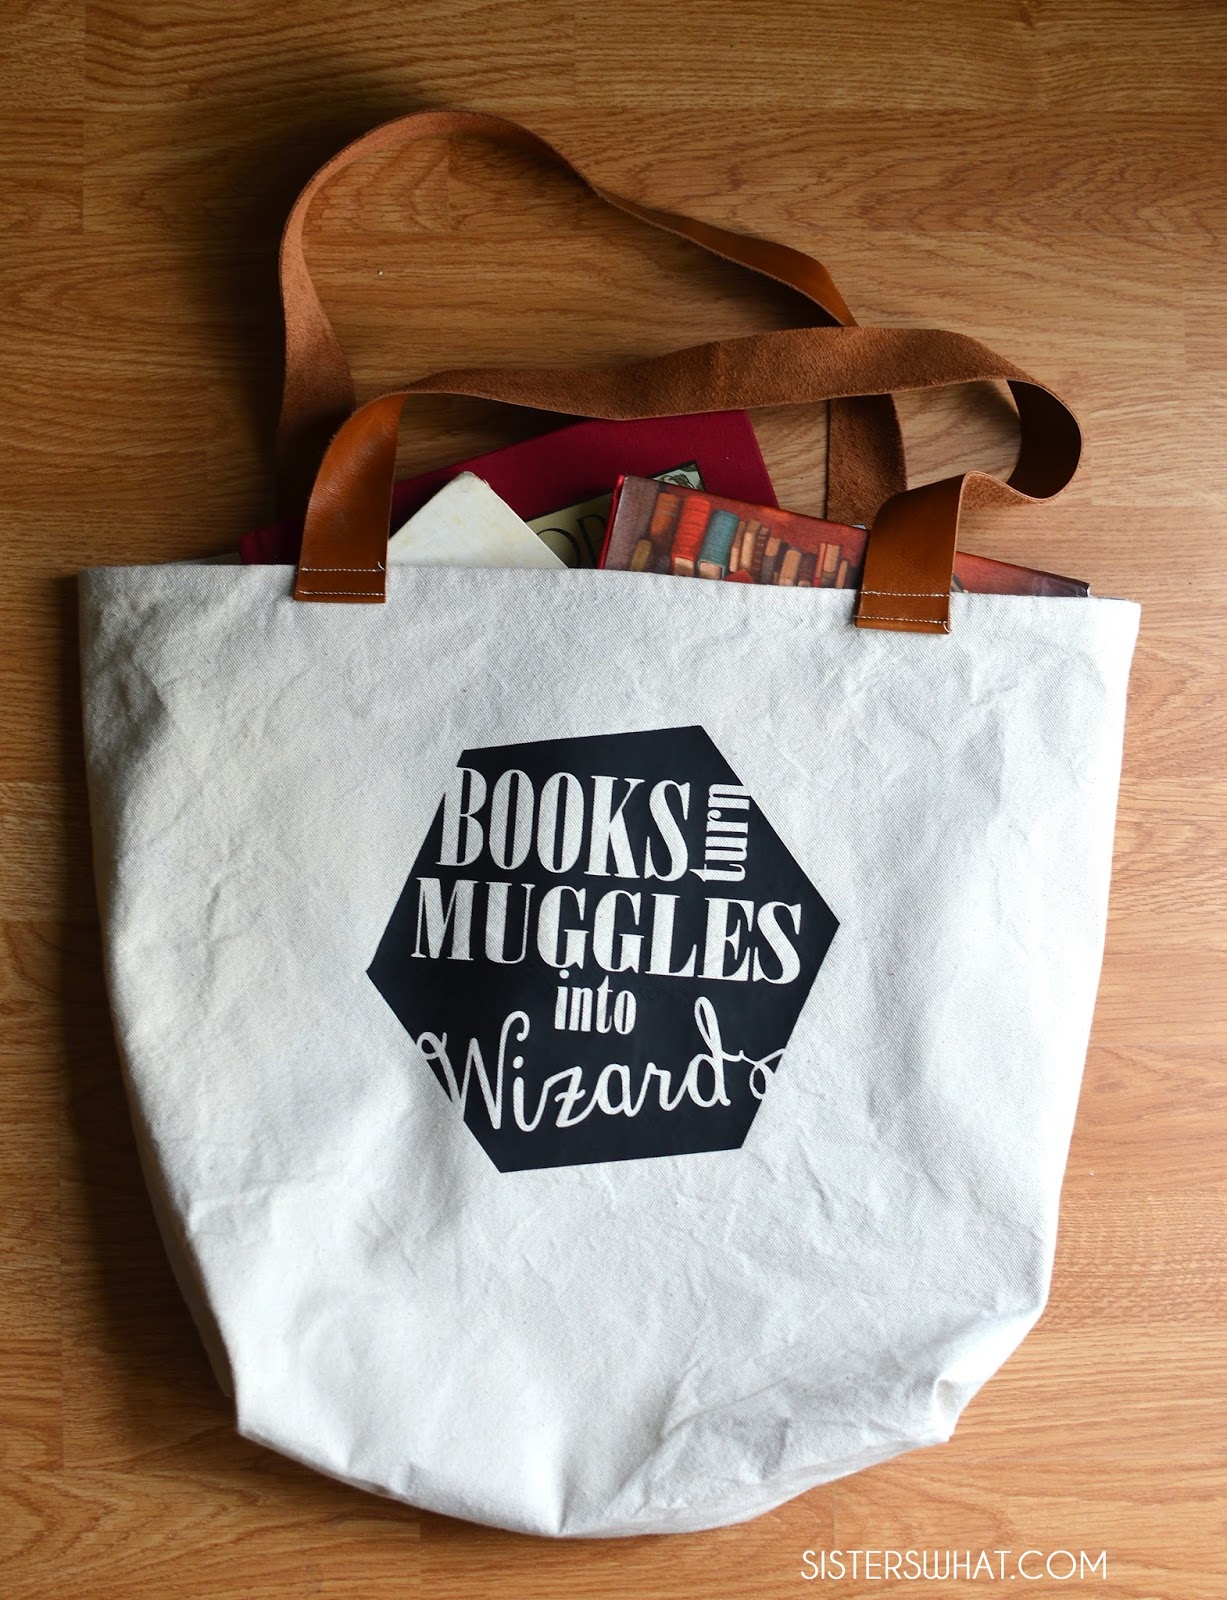 library book bag: books turn muggles into wizards